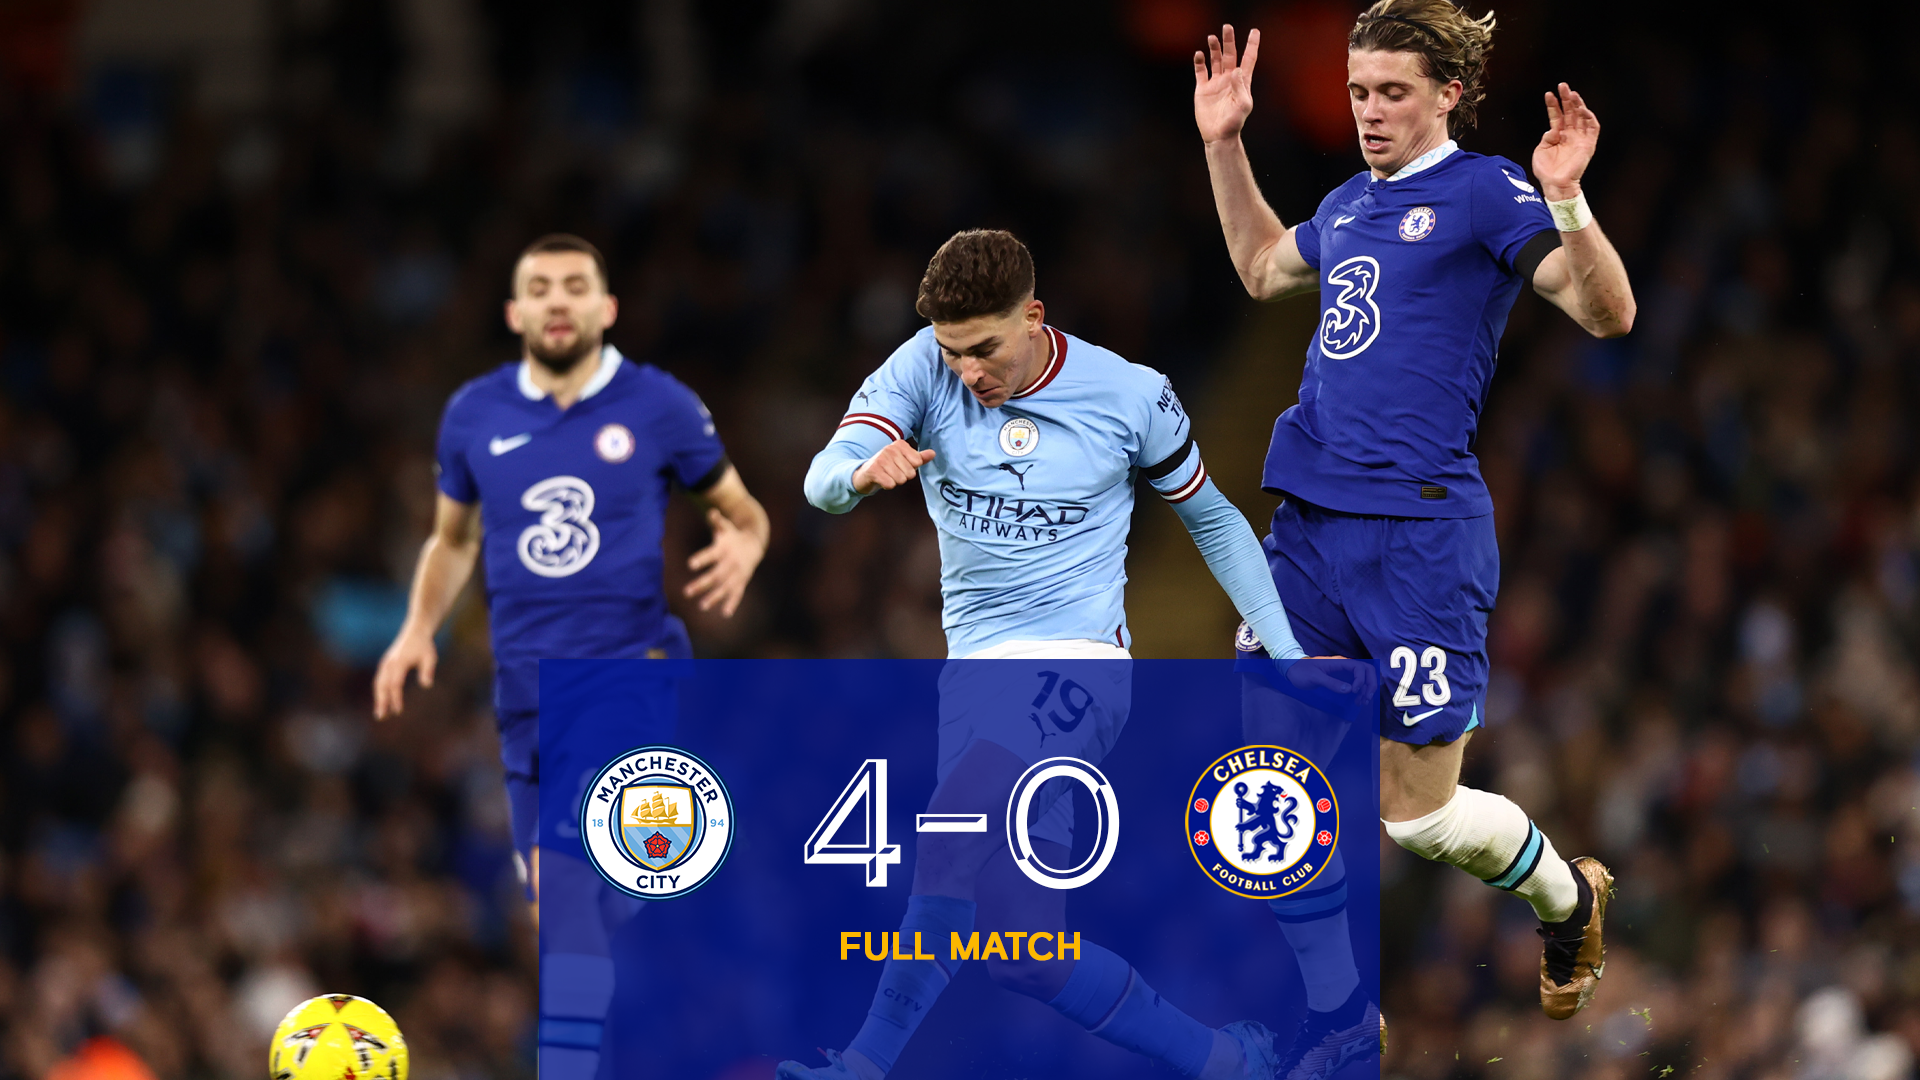 Full Match Man City 4-0 Chelsea Video Official Site Chelsea Football Club